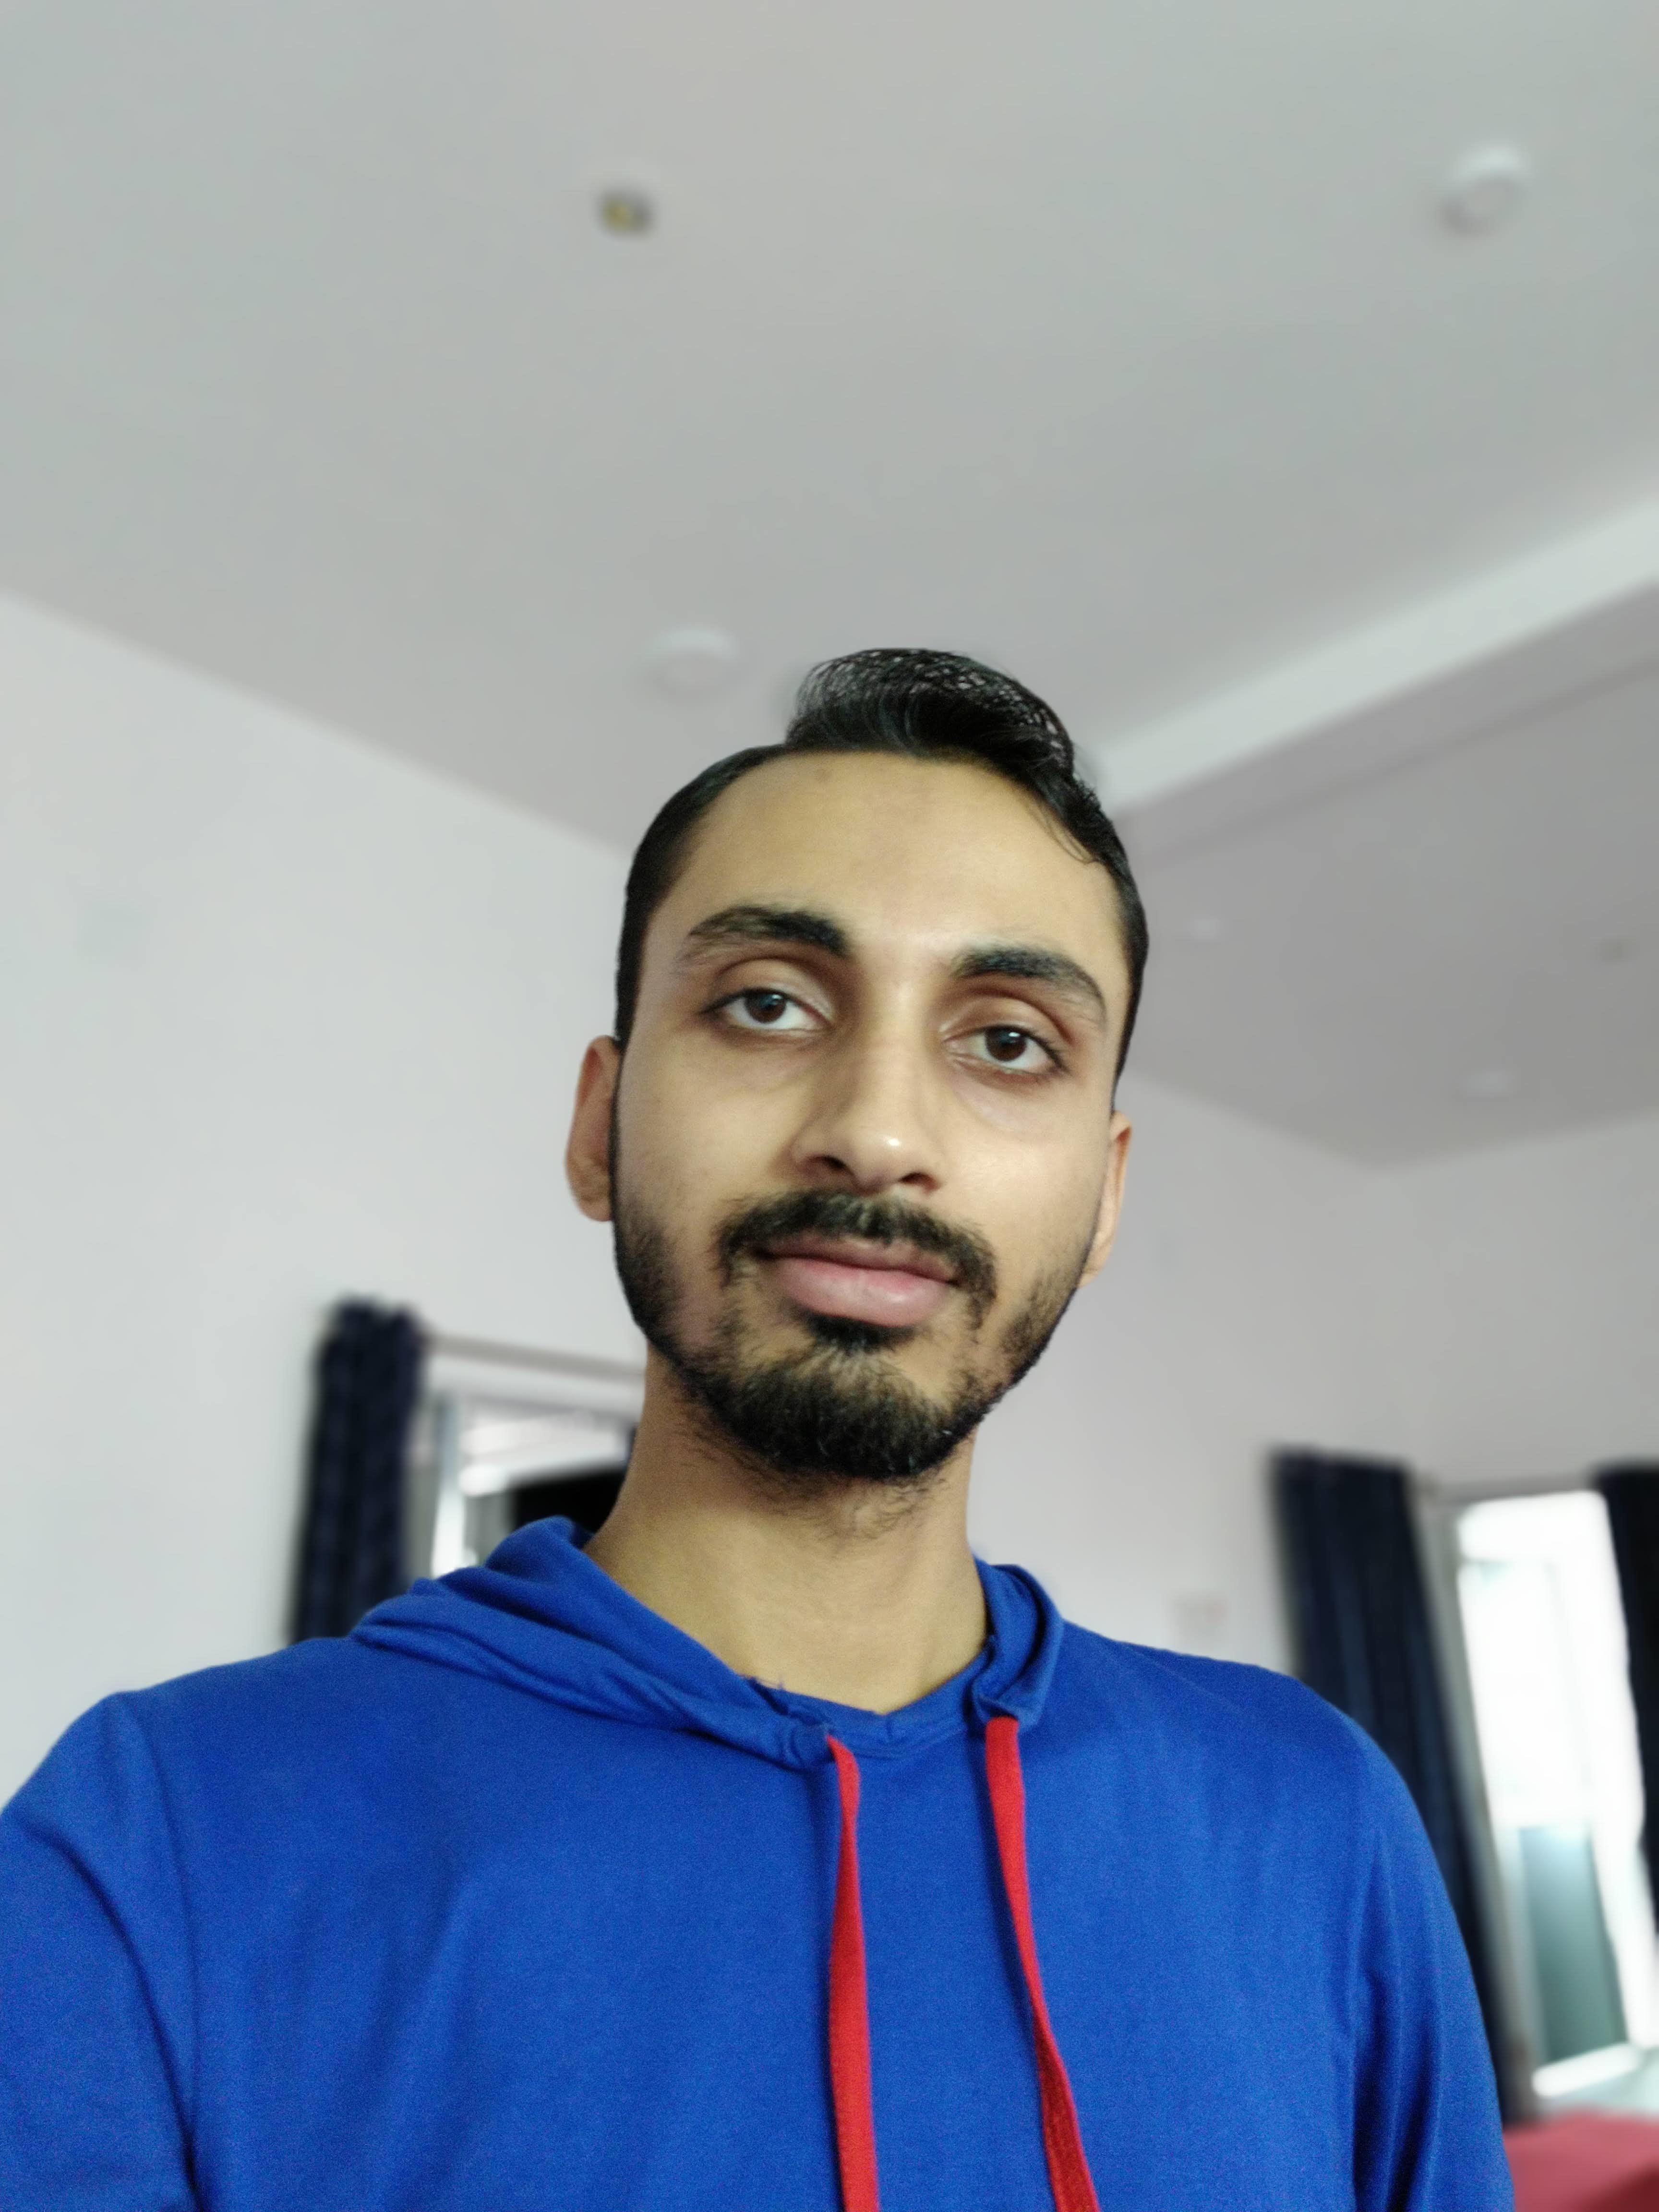 Nokia 6.1 Plus Review and Unboxing by Rahul Dubey